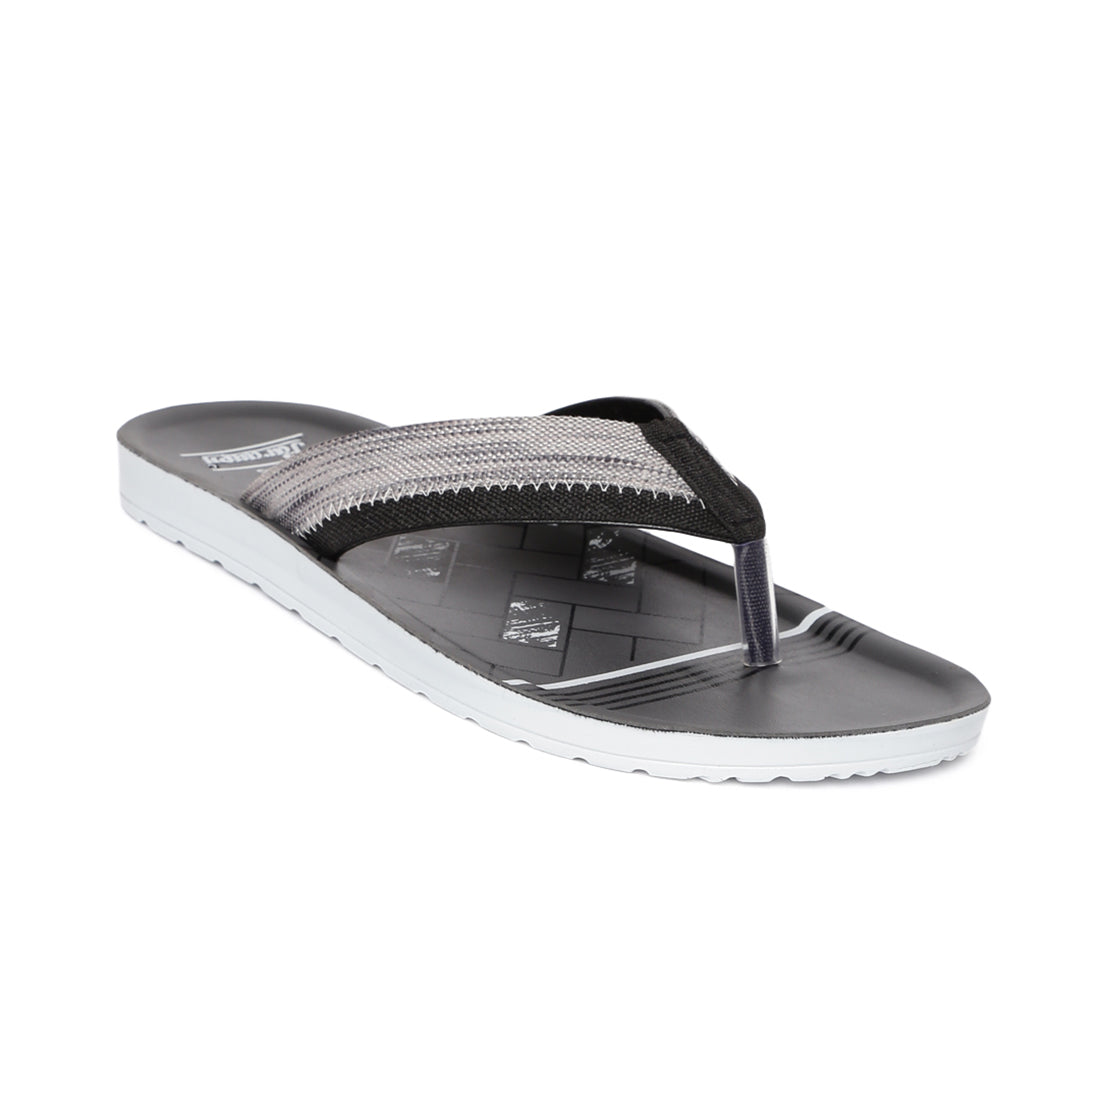 Paragon  PUK2207G Men Stylish Sandals | Comfortable Sandals for Daily Outdoor Use | Casual Formal Sandals with Cushioned Soles